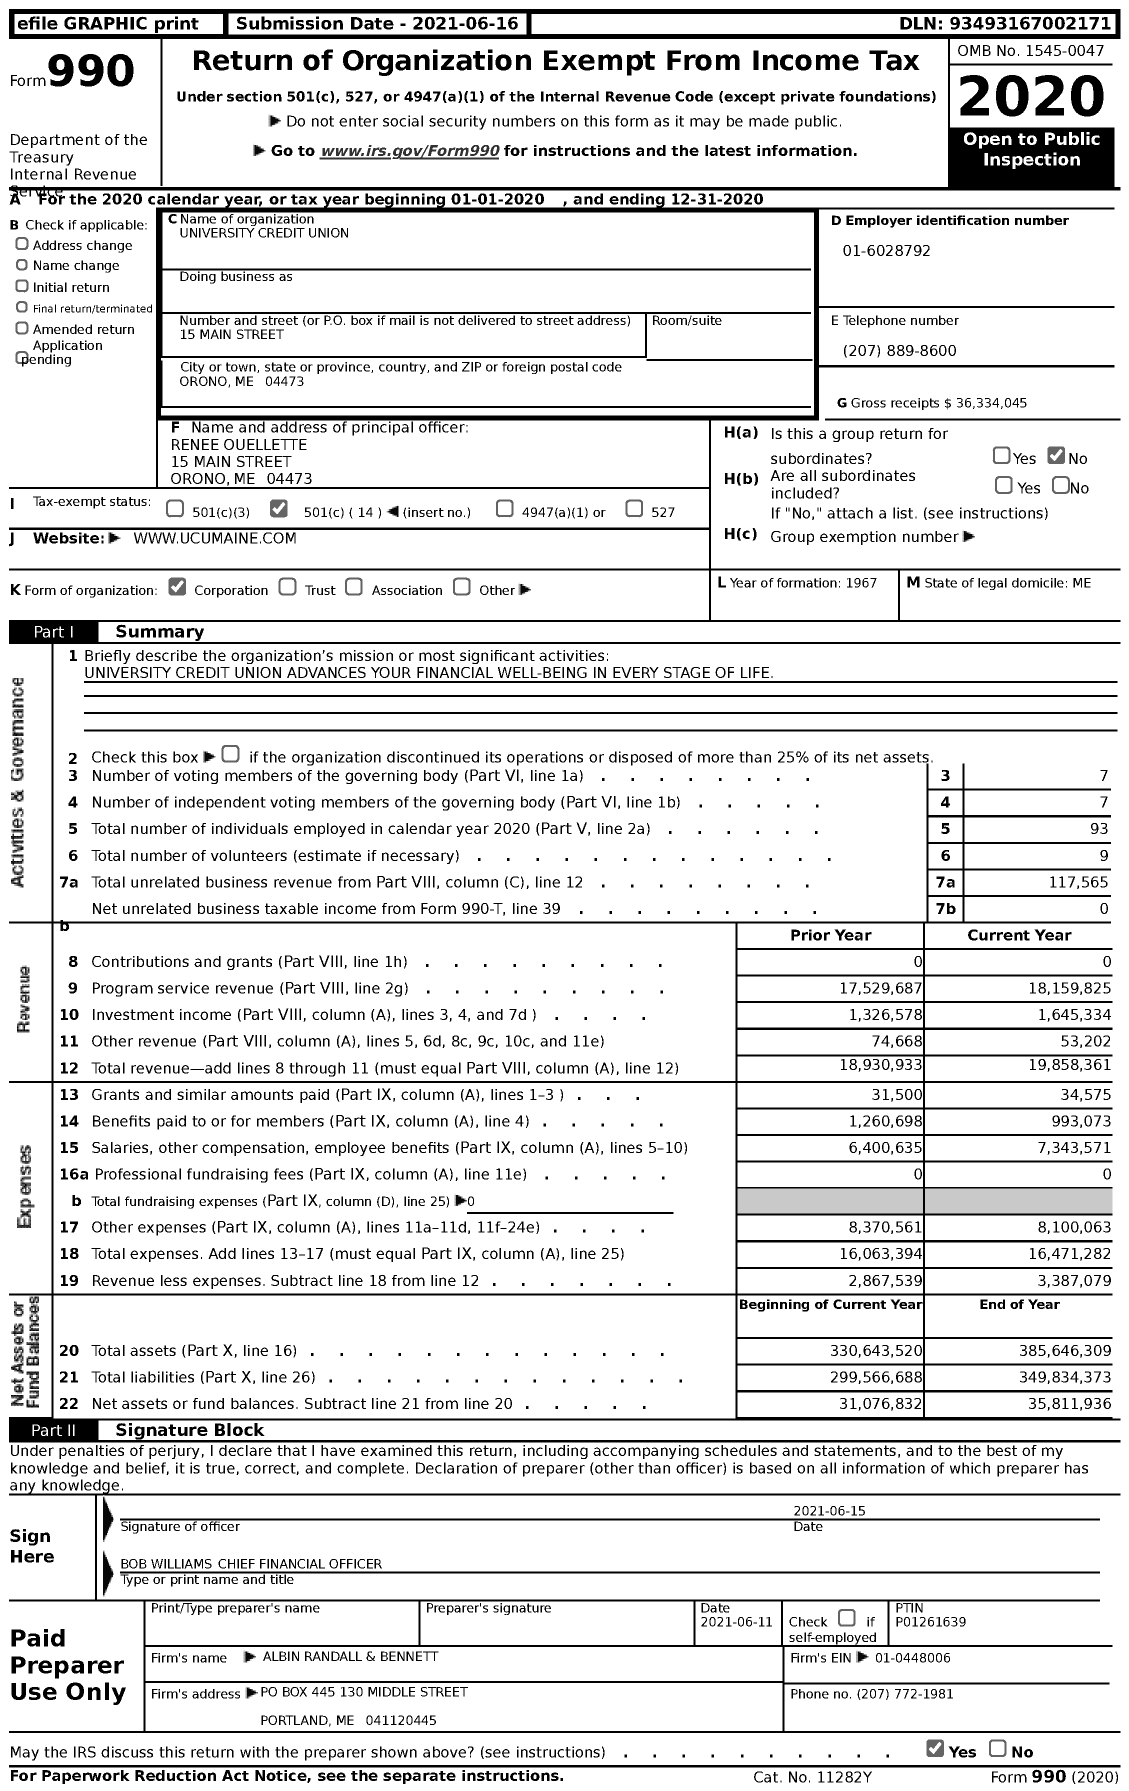 Image of first page of 2020 Form 990 for University Credit Union (UCU)